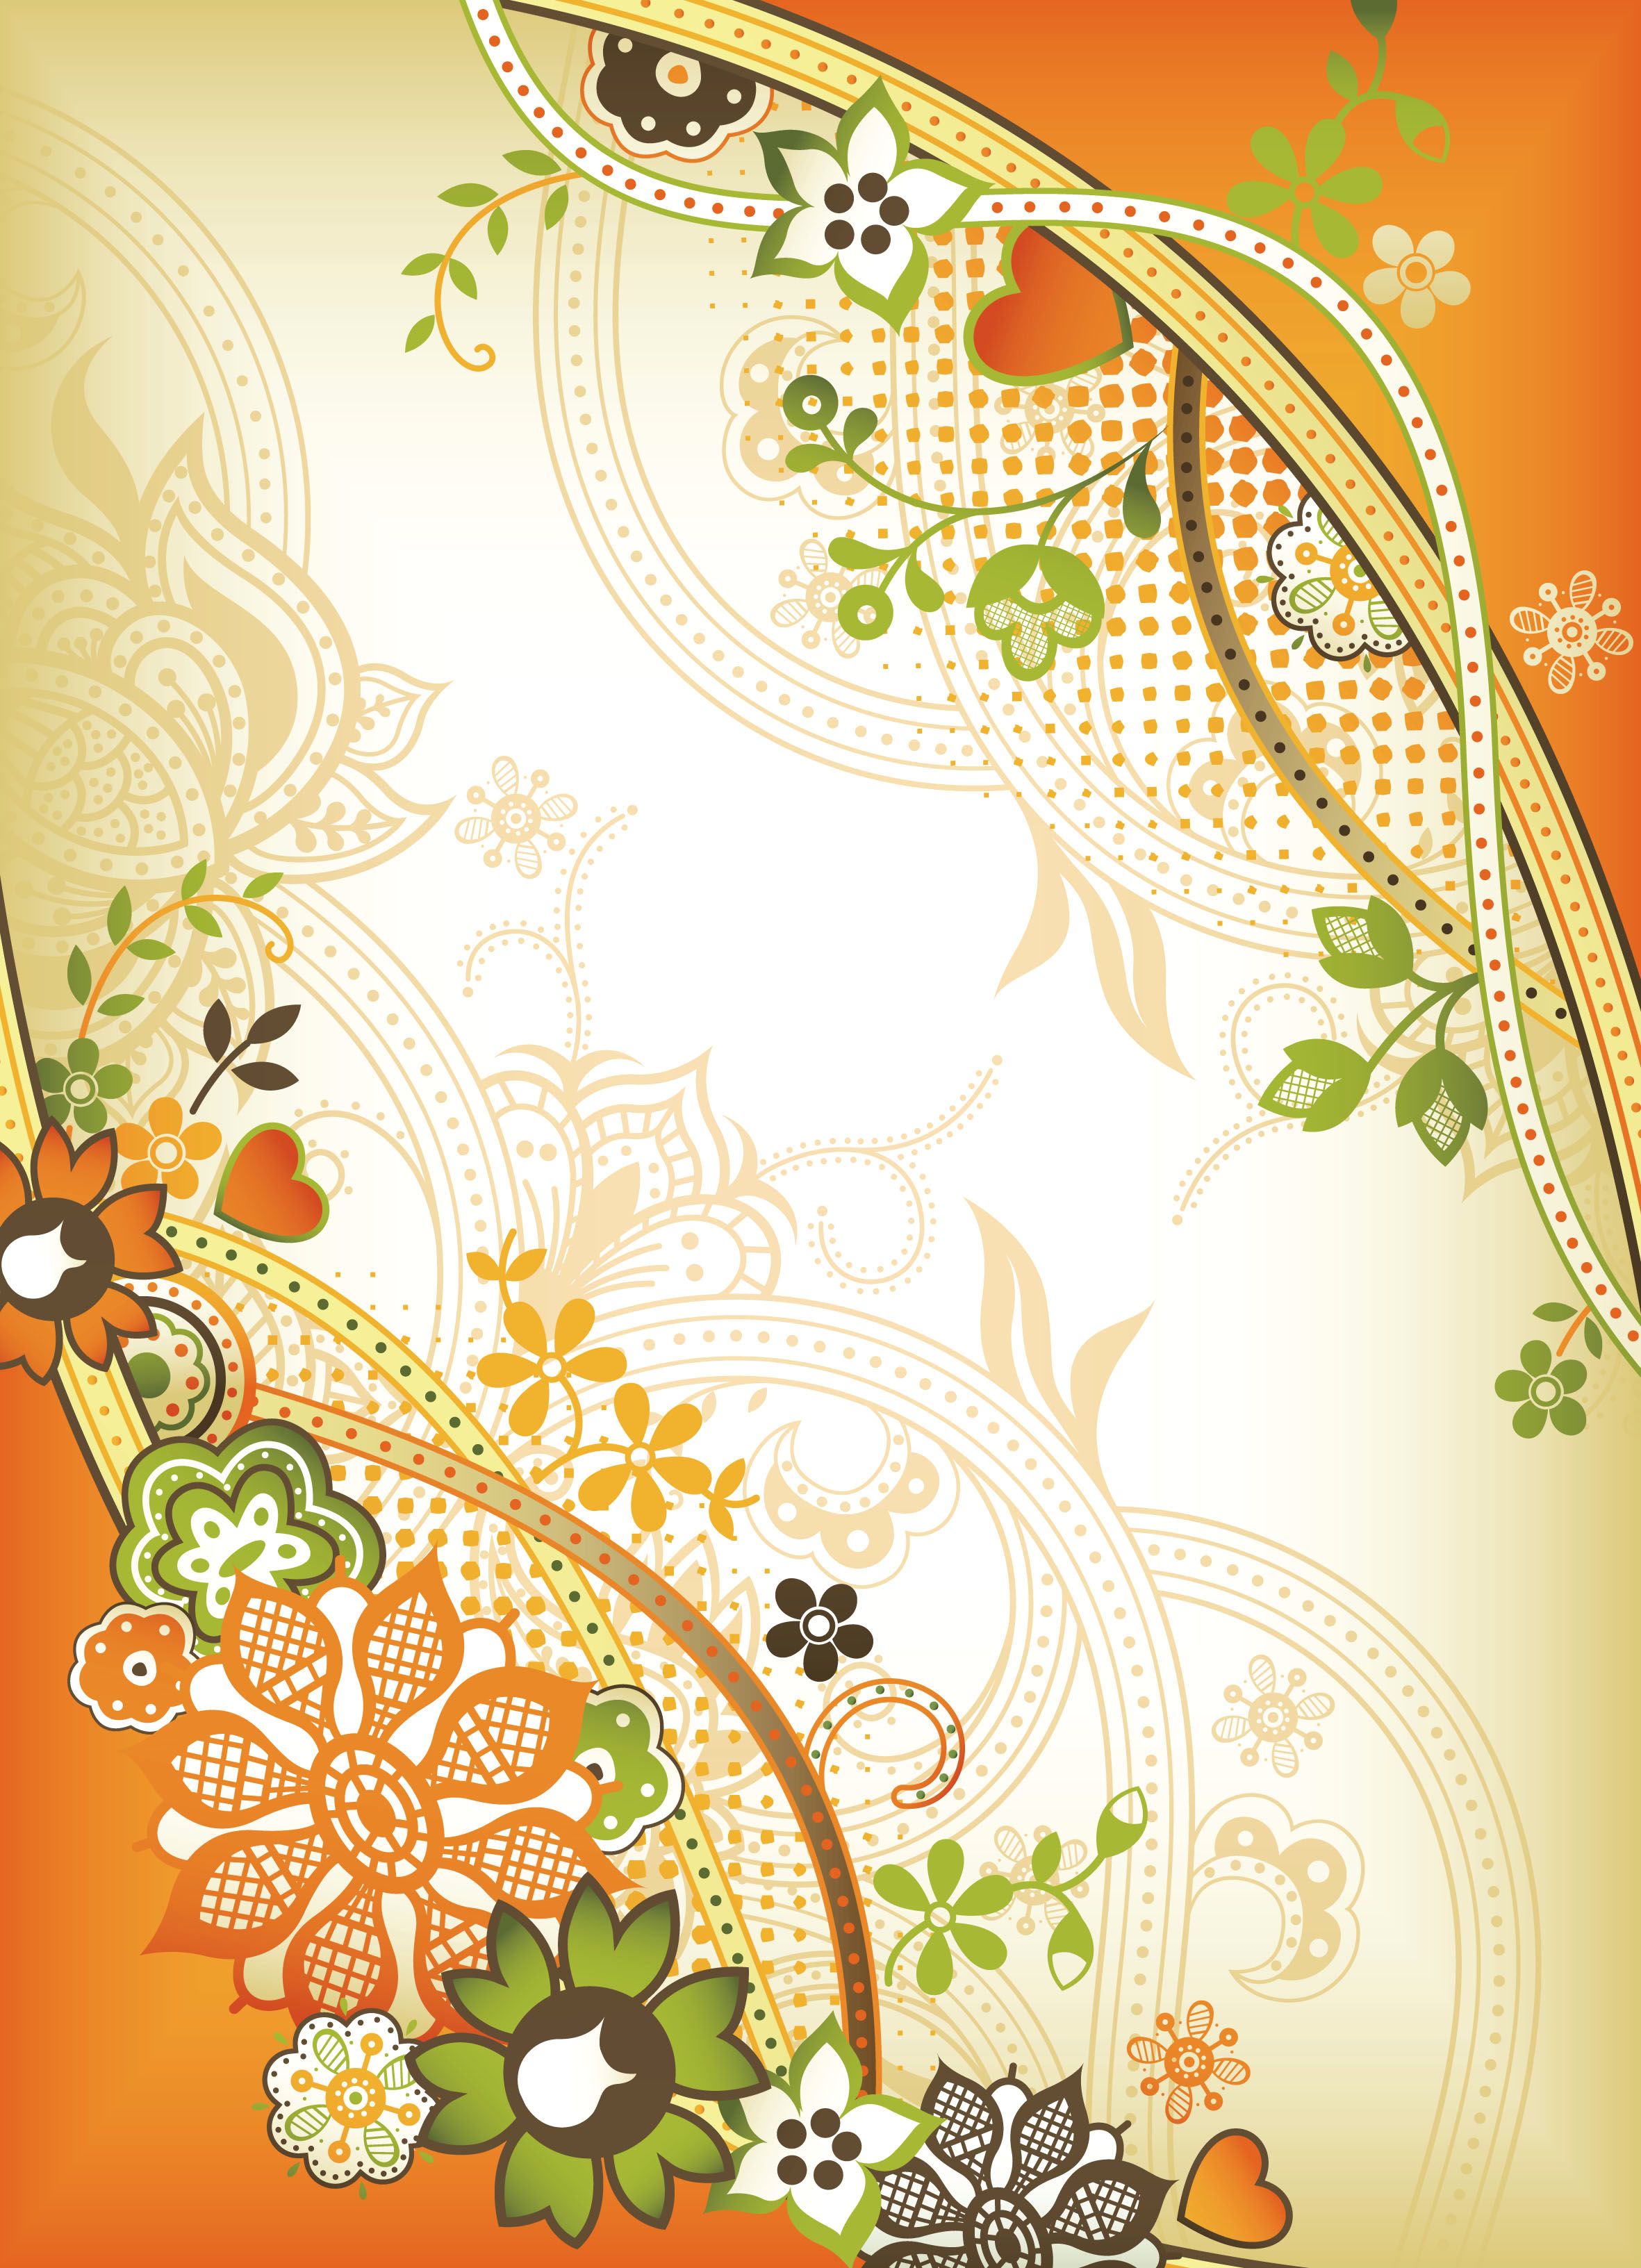 free pattern wallpapers,floral design,text,clip art,ornament,pattern